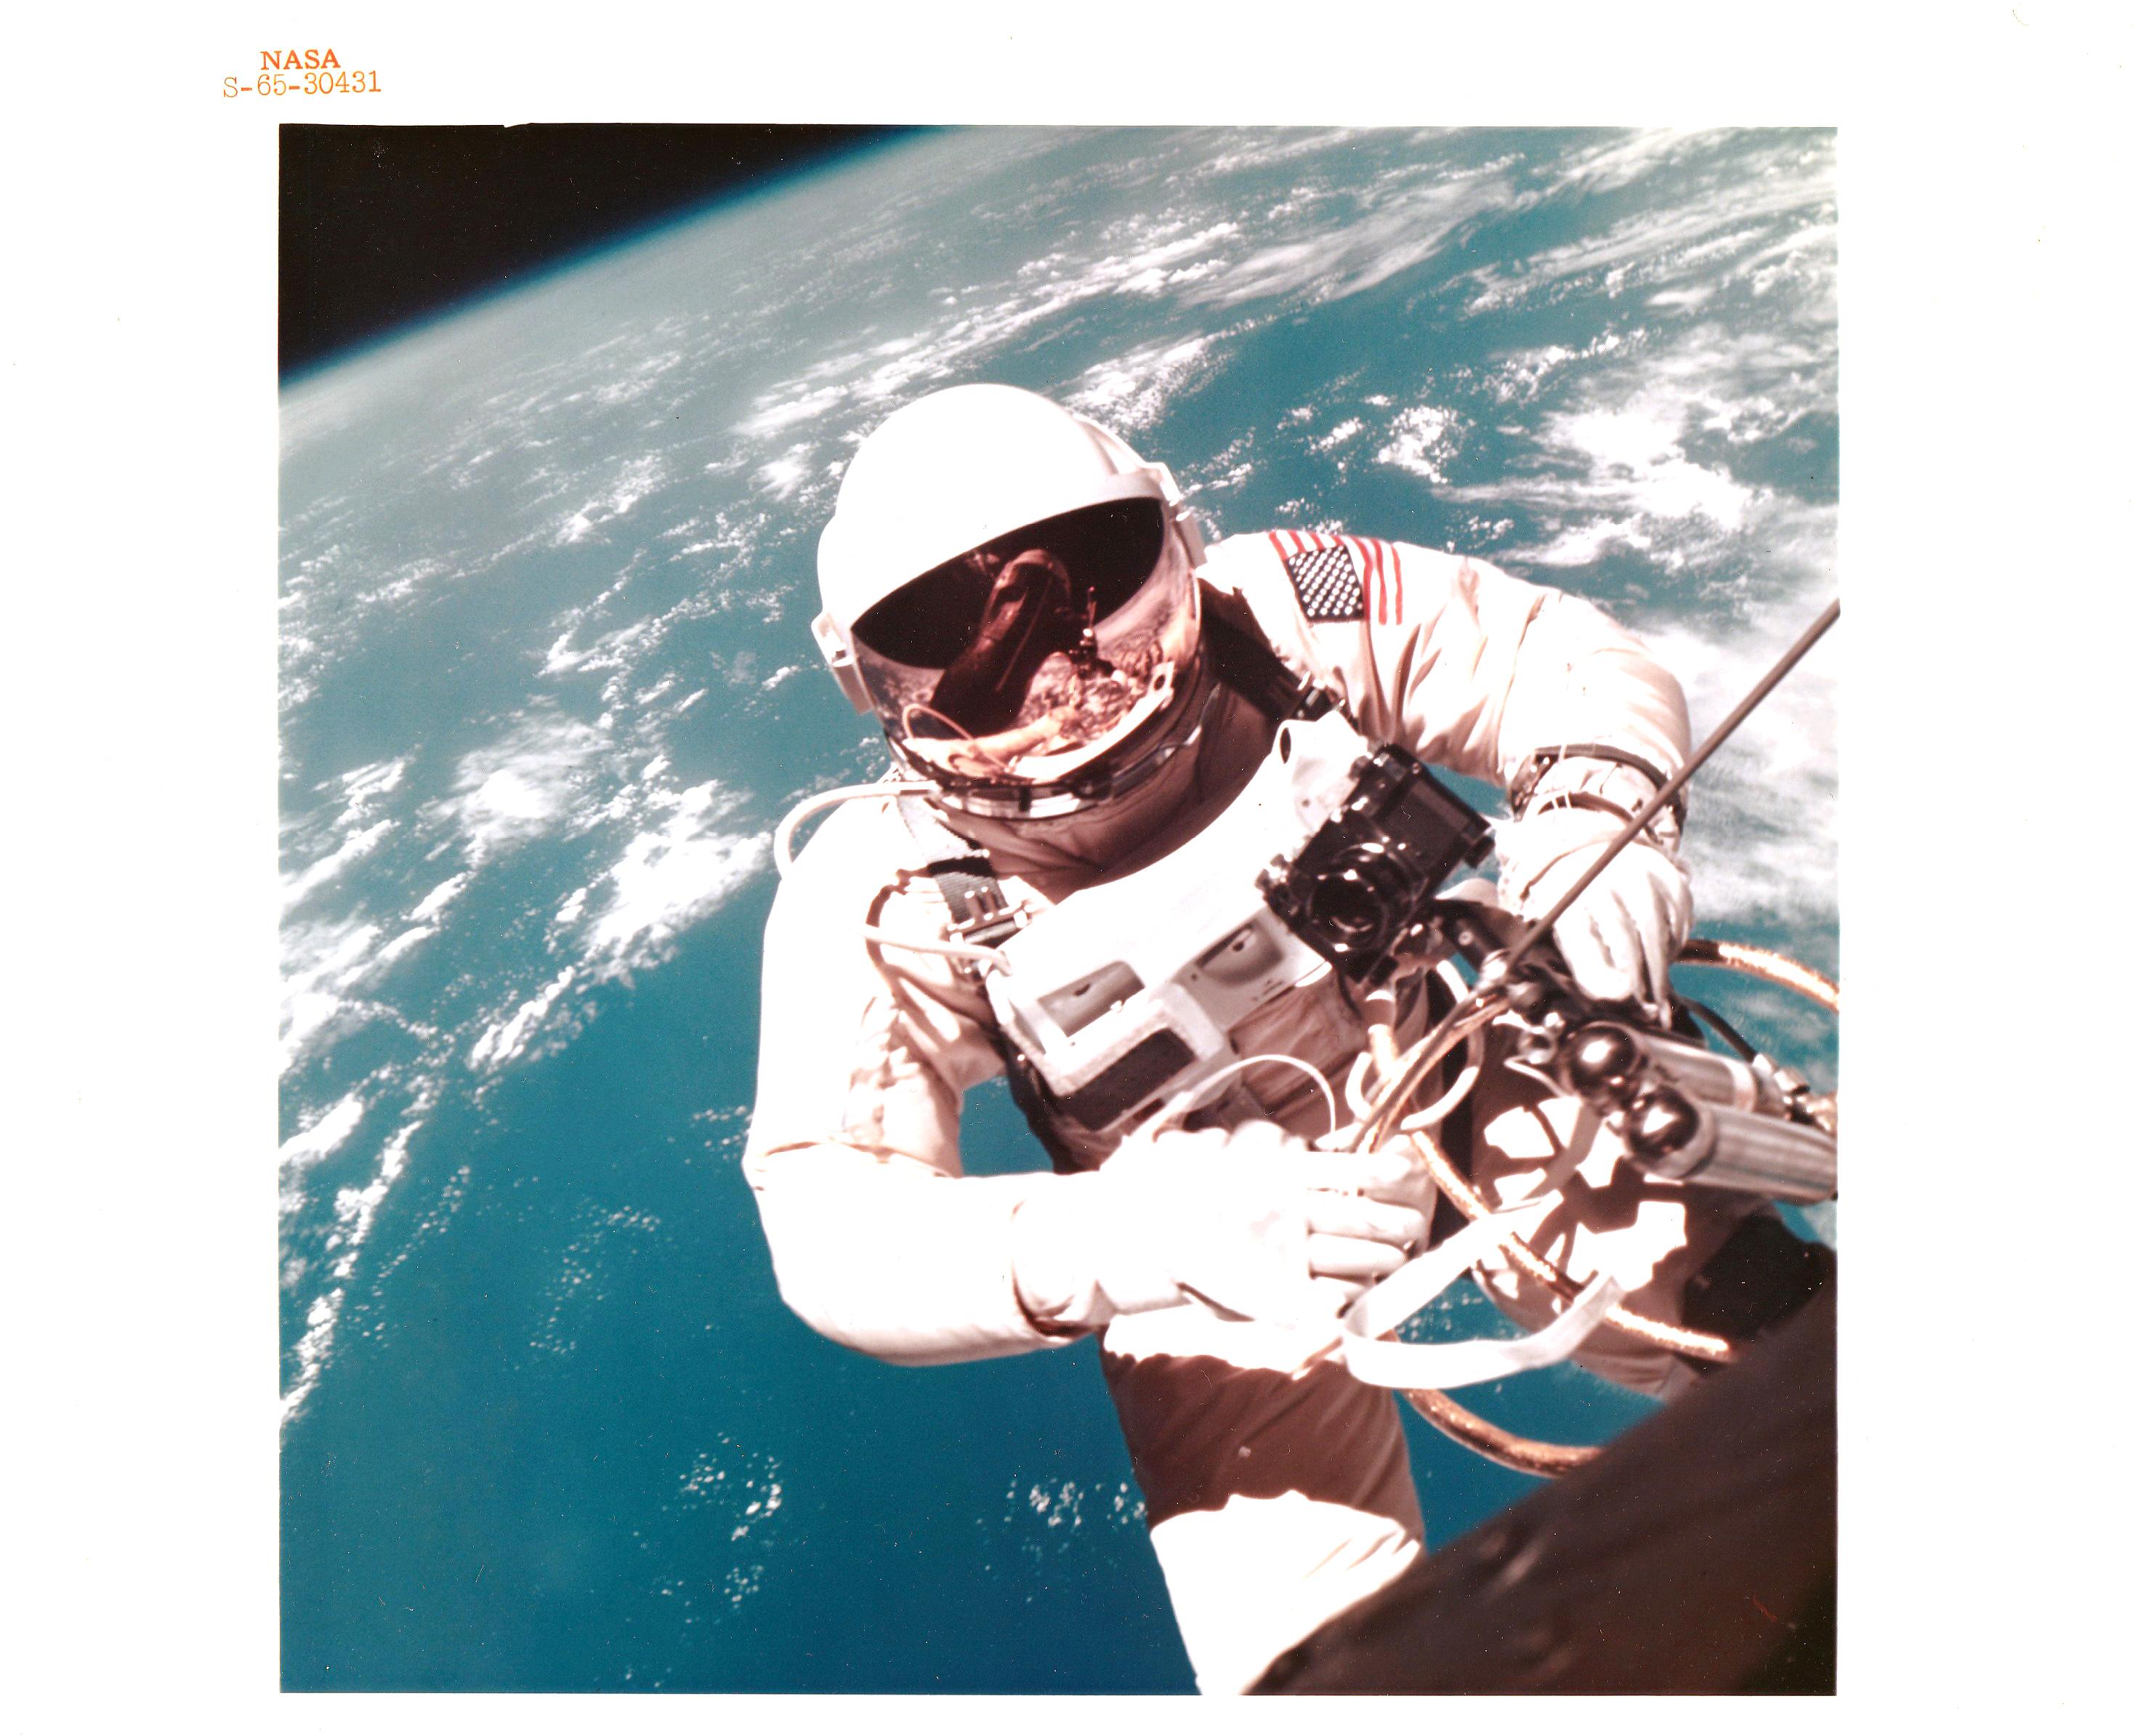 NASA Color Photograph - Historic First Photograph of Man in Space: Ed White spacewalking over Hawaii